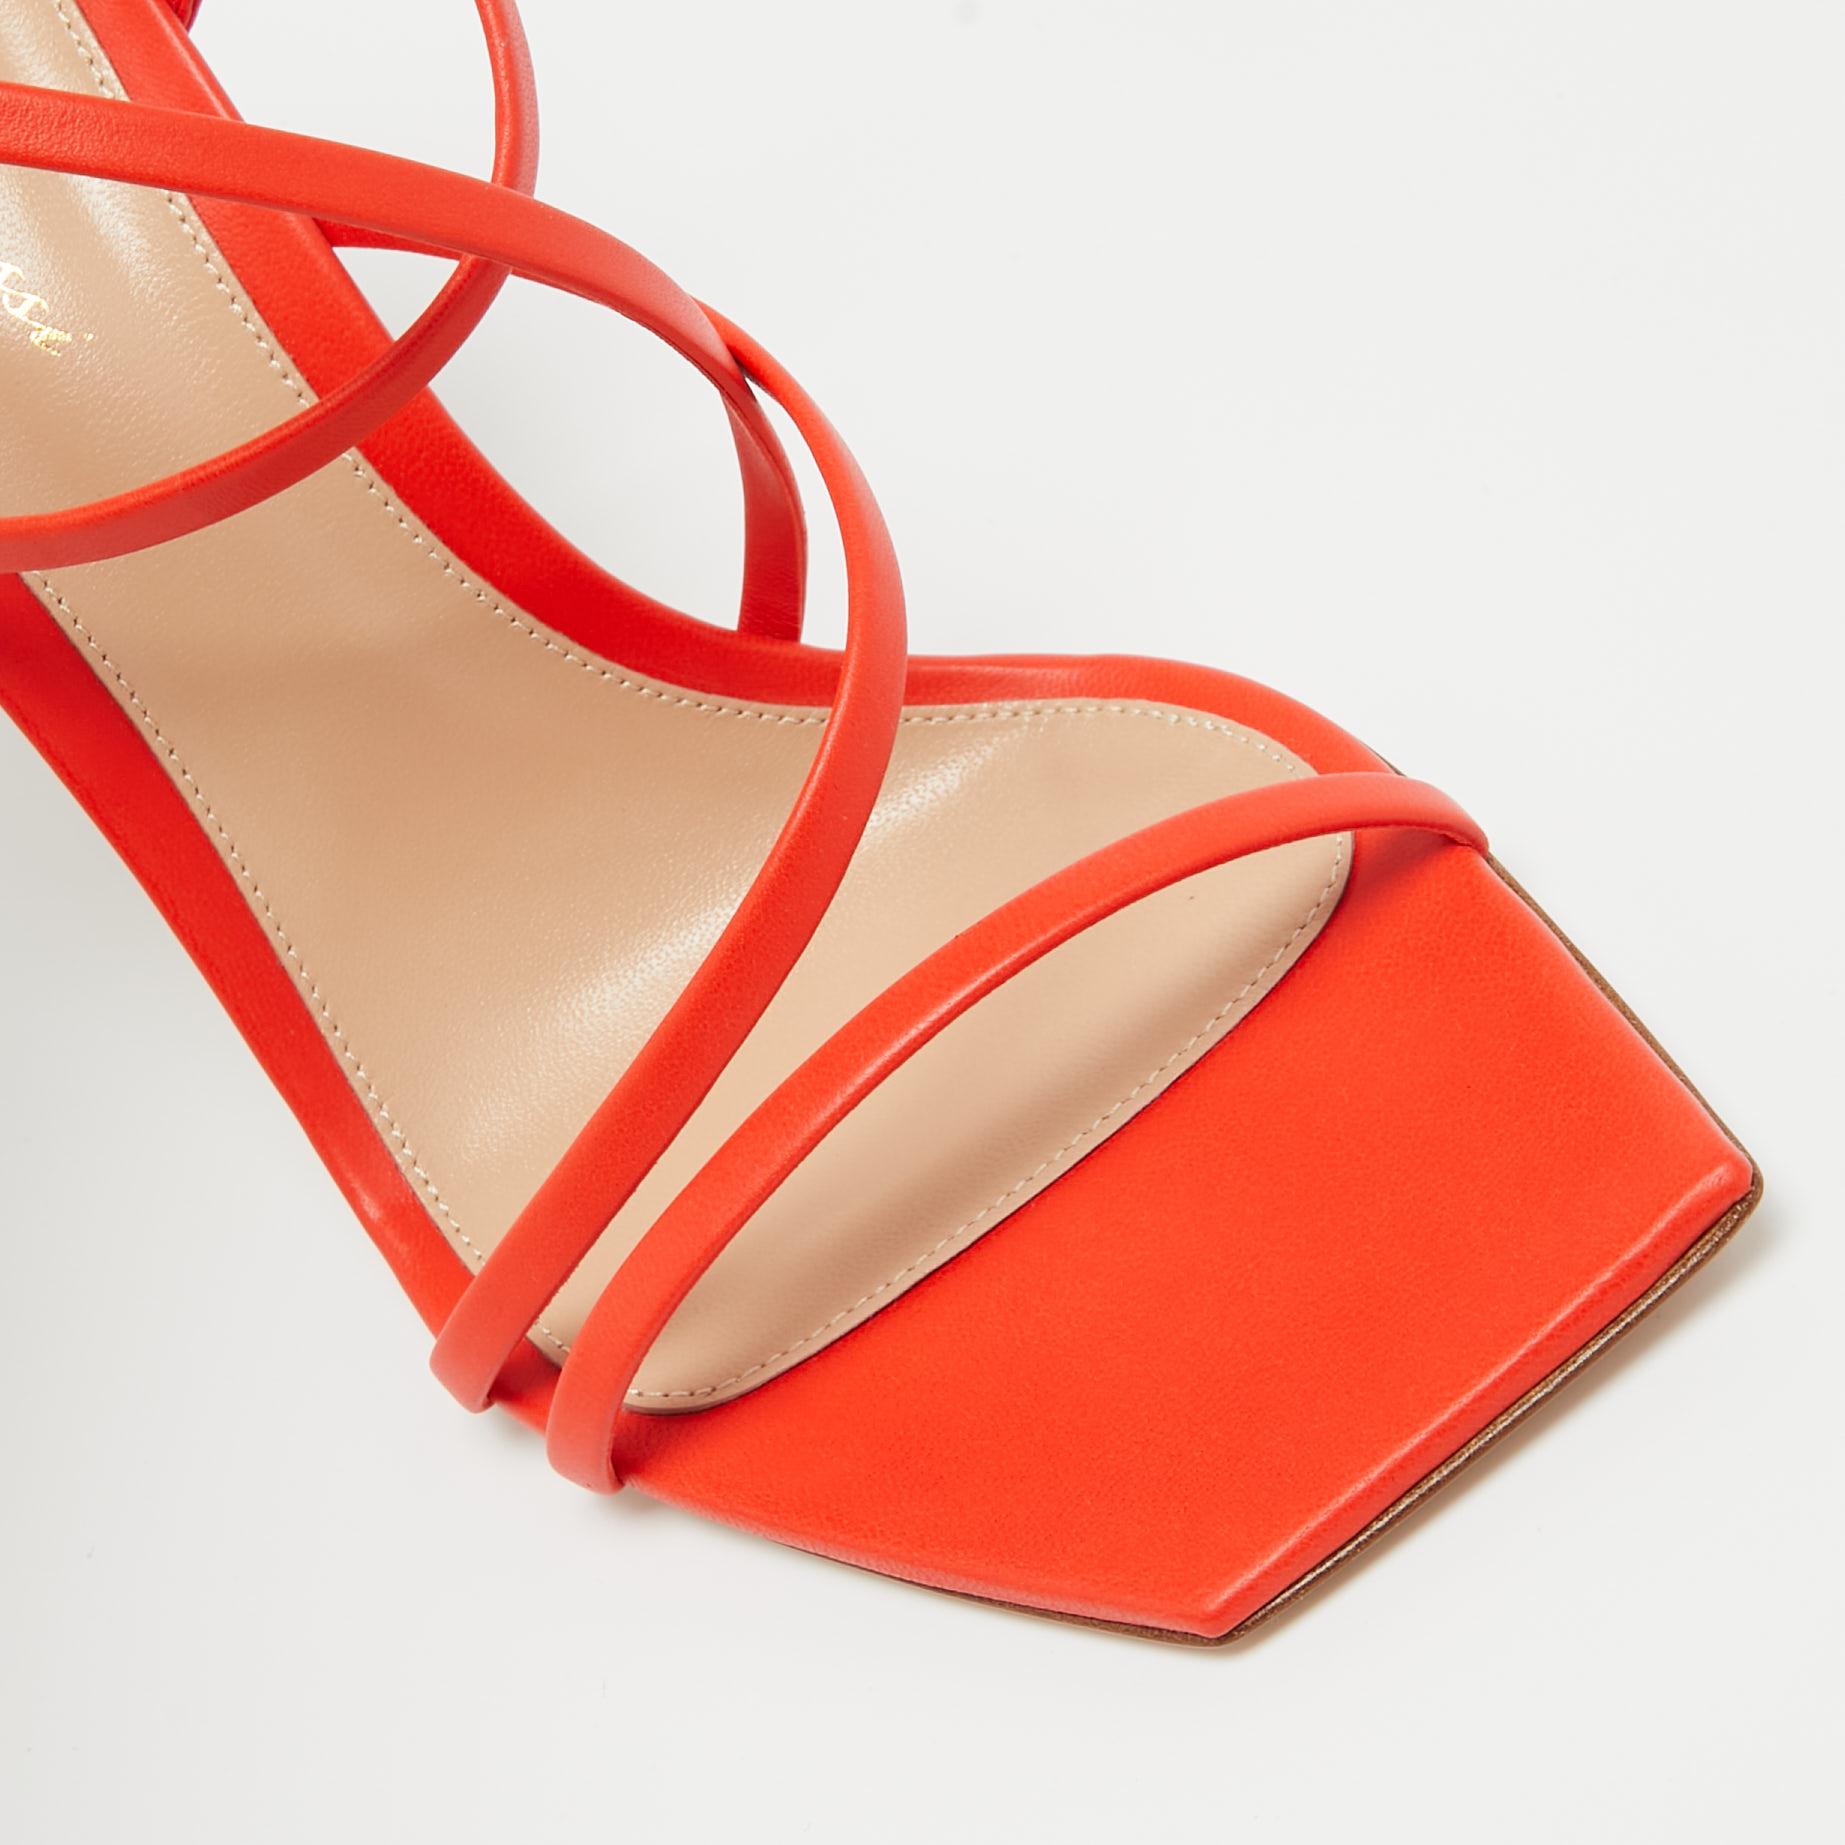 In vibrant orange leather, the Gianvito Rossi Manilla sandals exude confident charm. Delicate straps gracefully embrace the foot, while a sturdy heel provides stability and style. With impeccable craftsmanship and timeless design, these sandals